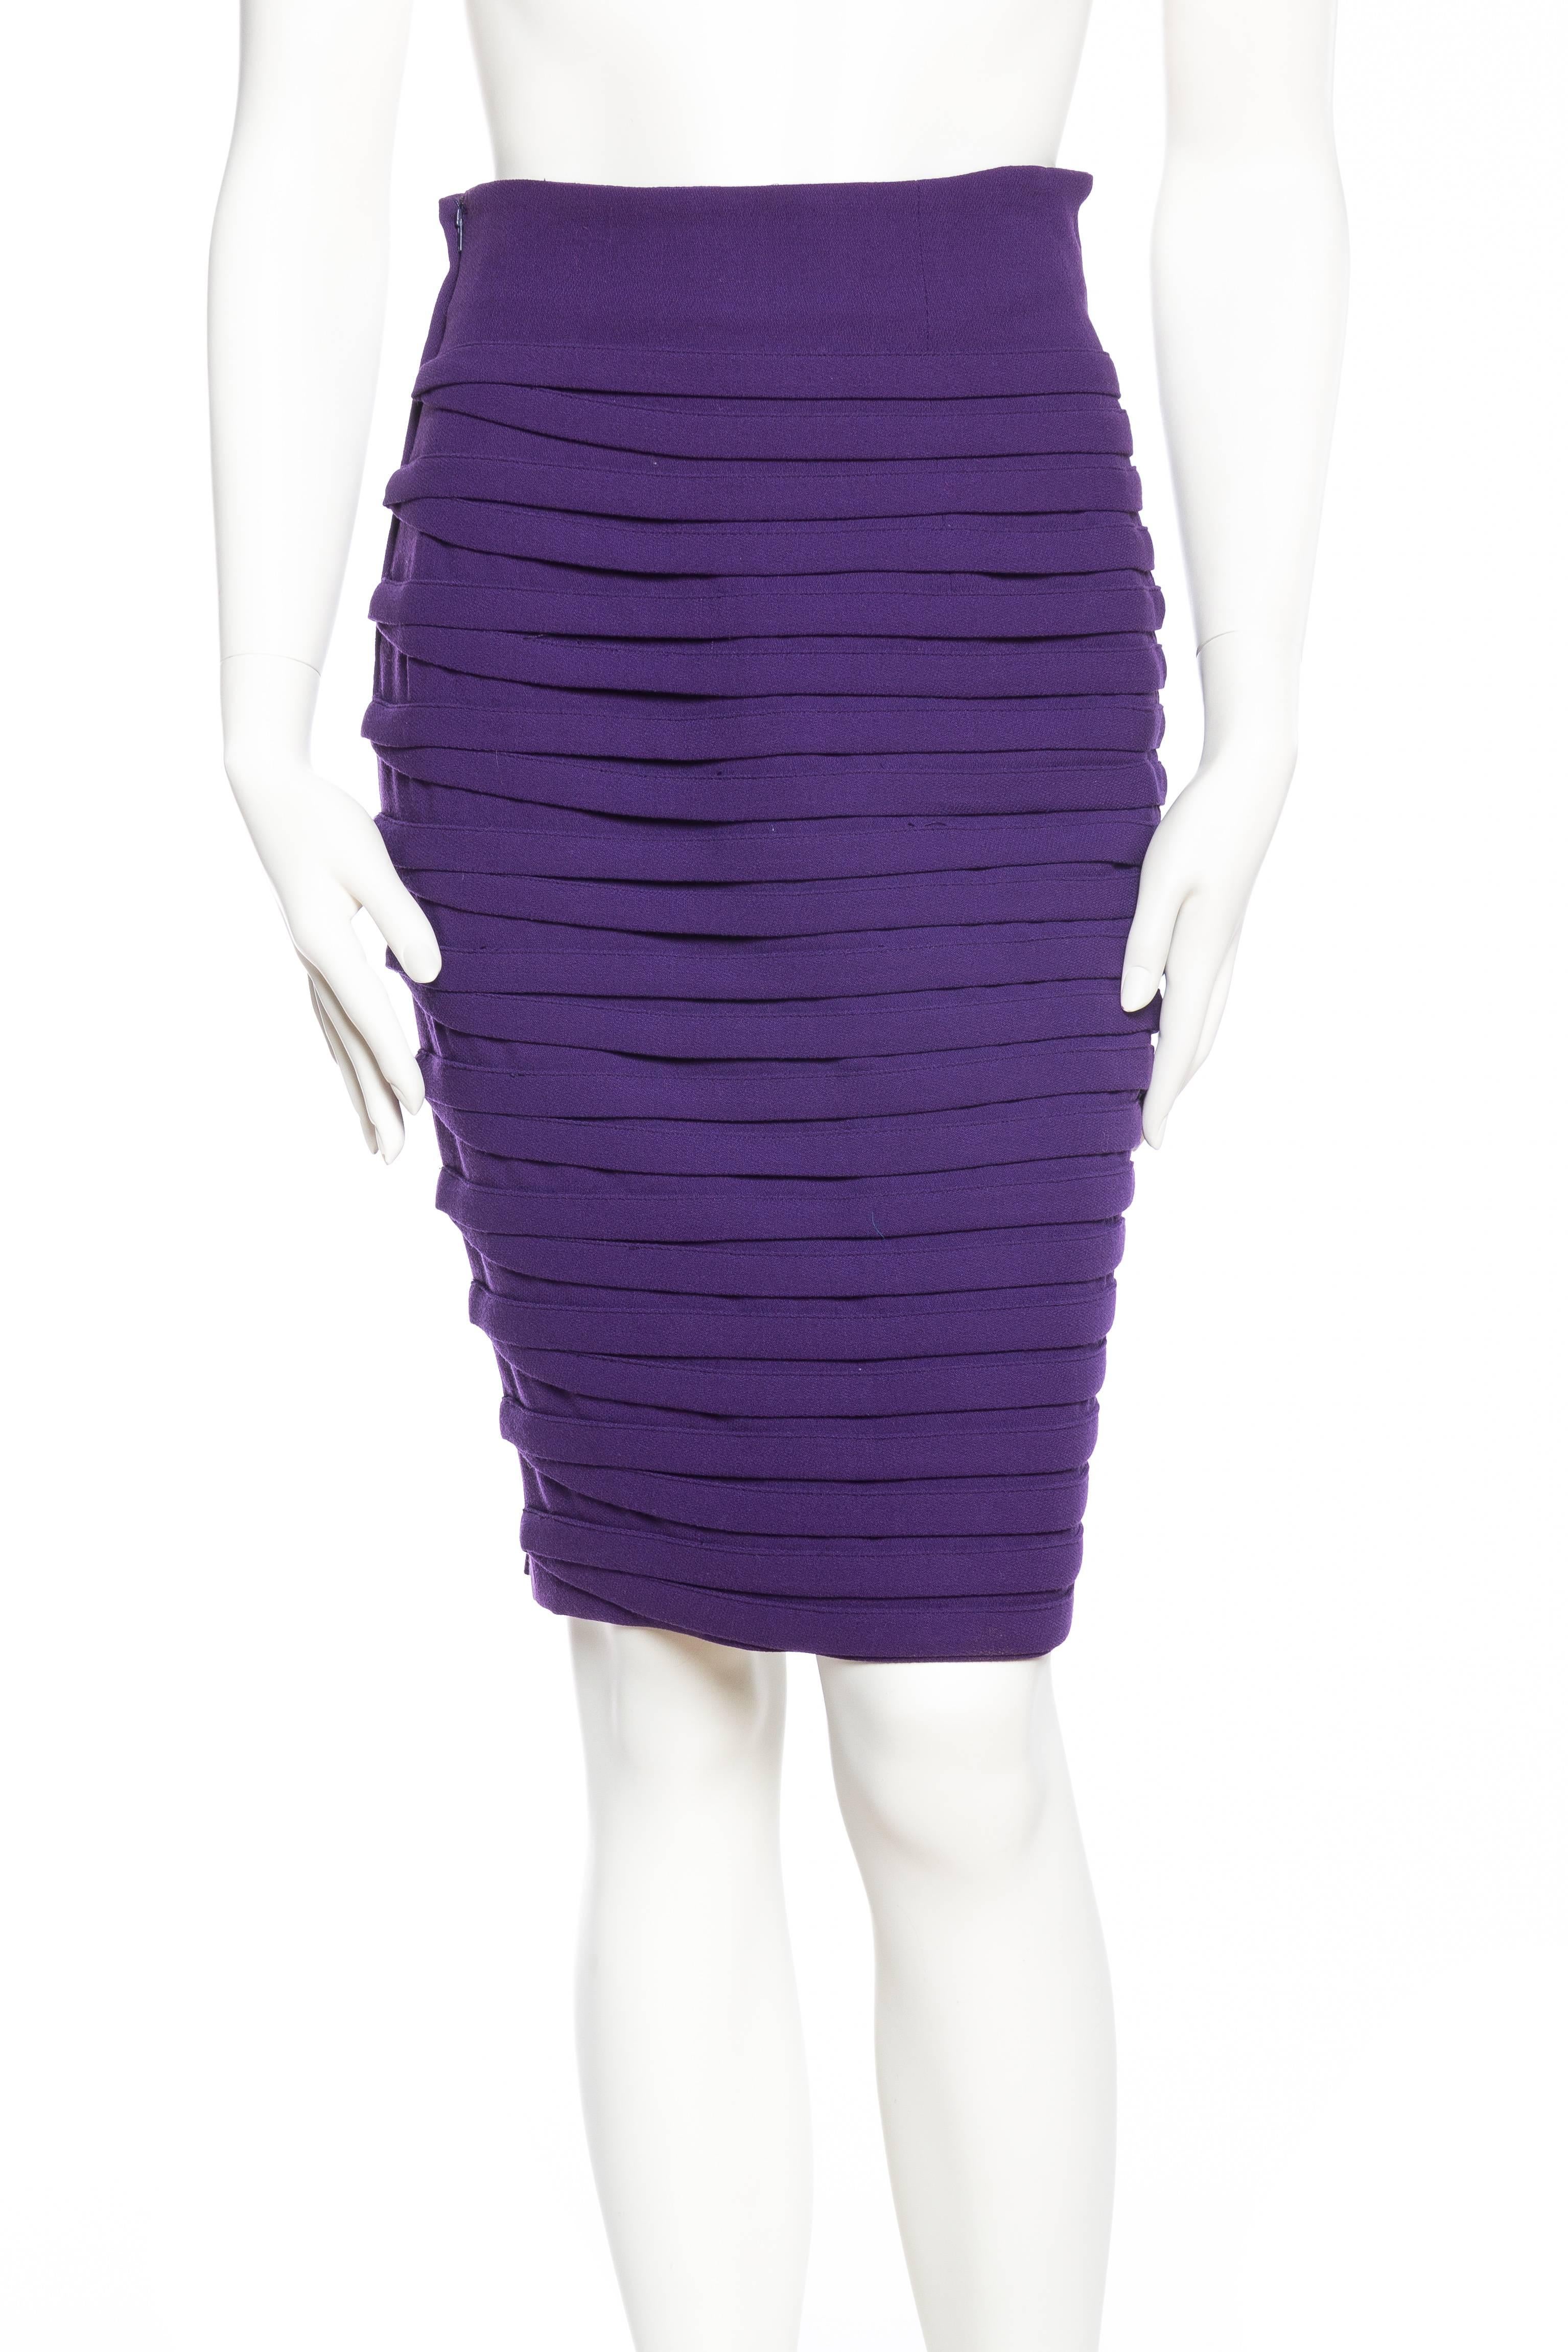 Purple 1980s Gianni Versace Couture High Waisted Pencil Skirt